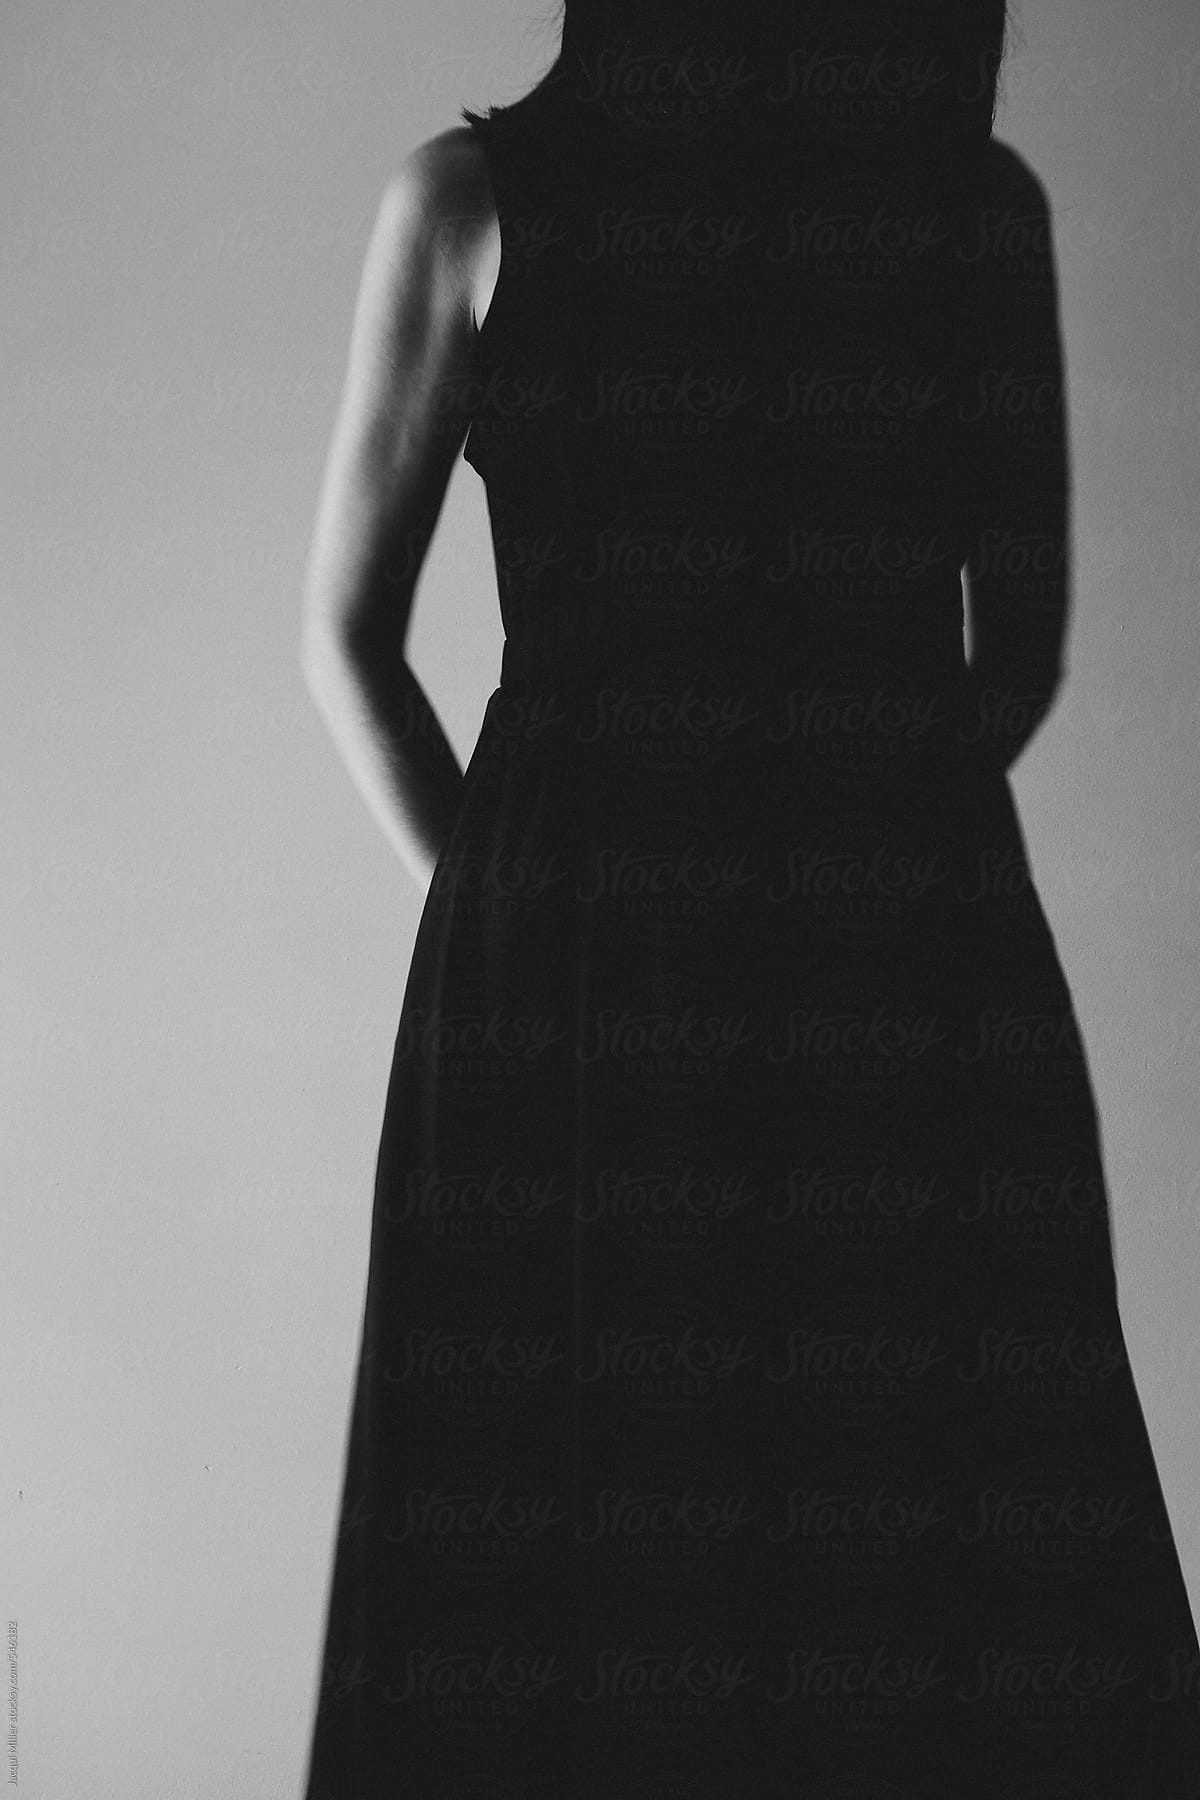 Moody, black and white image of mysterious woman wearing a long black dress